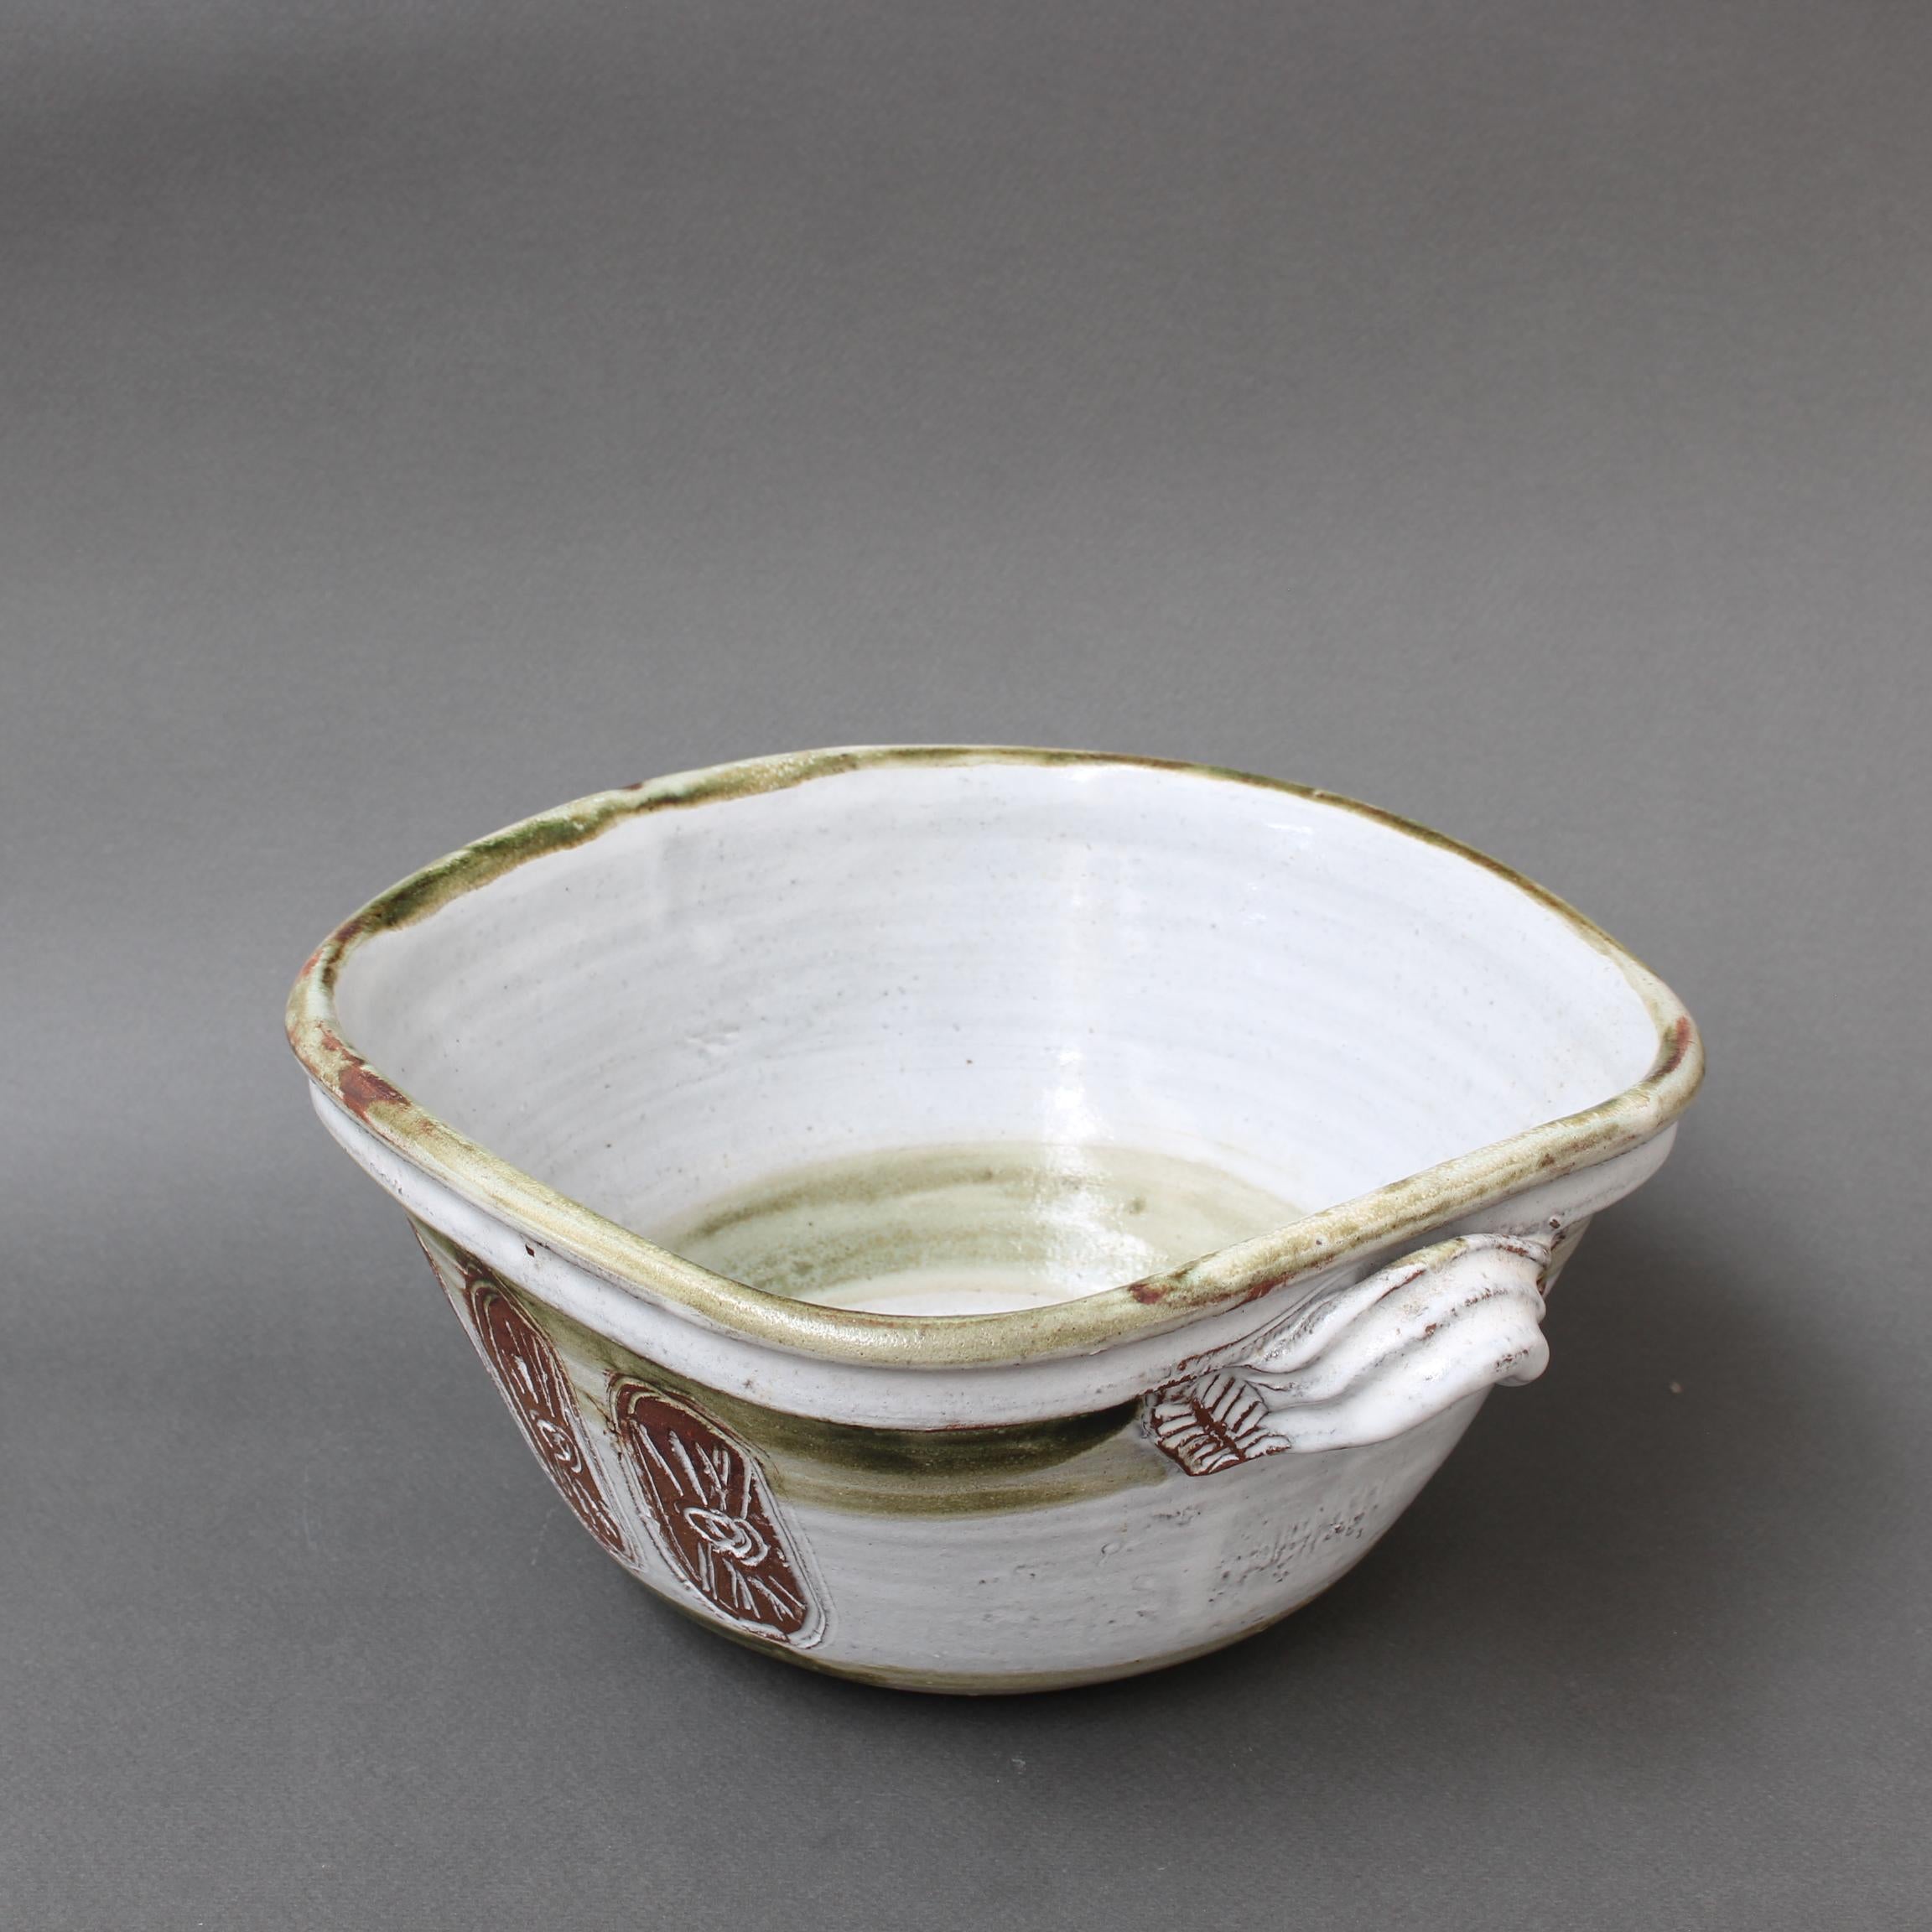 Mid-century decorative ceramic bowl (circa 1960s) by Albert Thiry (1932-2009). A chalk-white glaze forms the base for the interior and exterior sides of the bowl. At the base, you'll be delighted by a cheerful sun motif incised in the brown clay